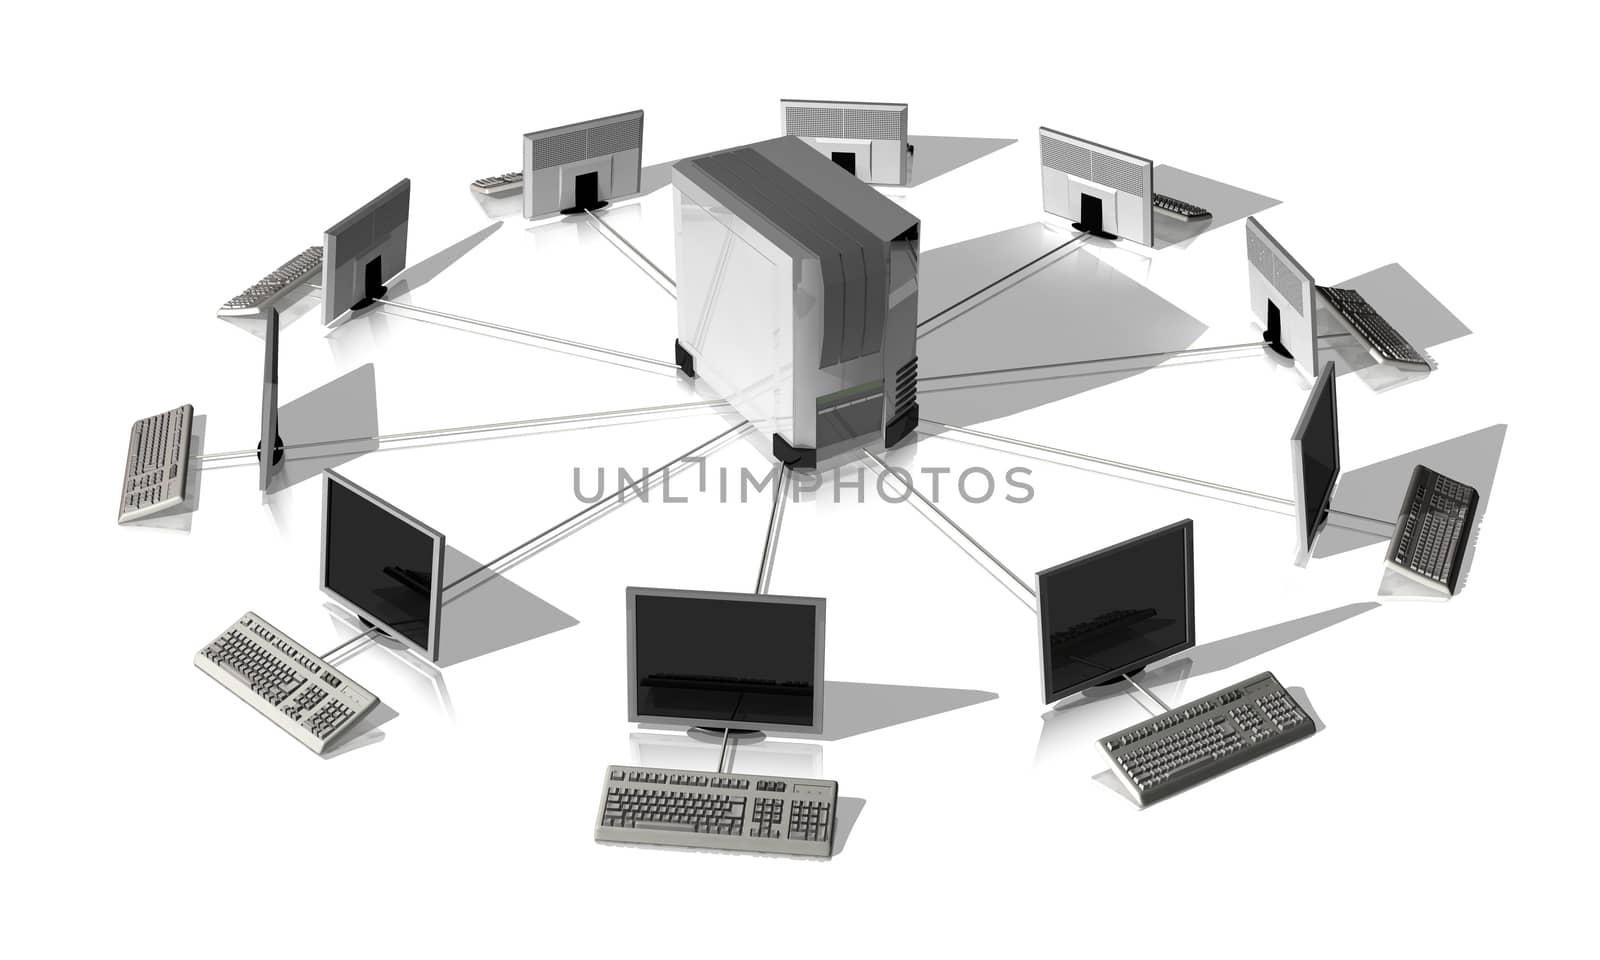 It network around a server isolated on white